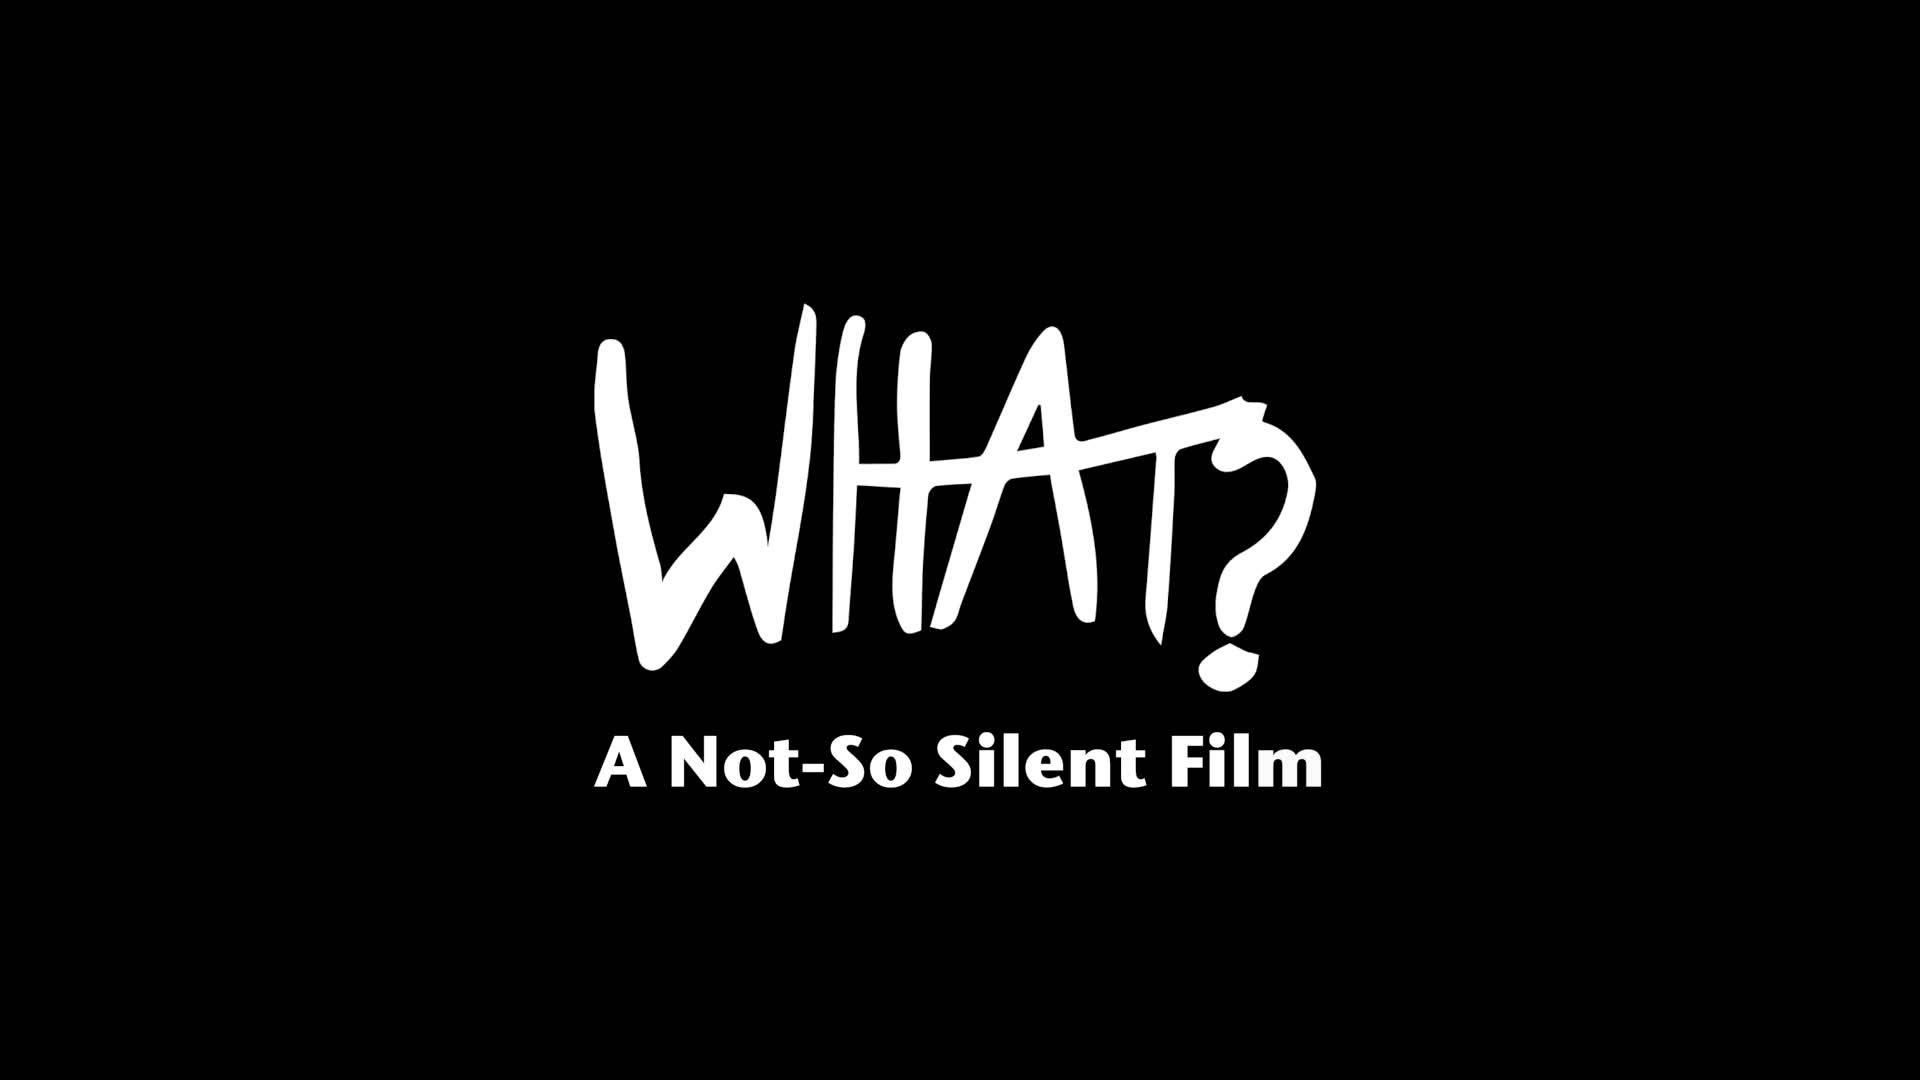 What Not So Silent Film Title Wallpaper